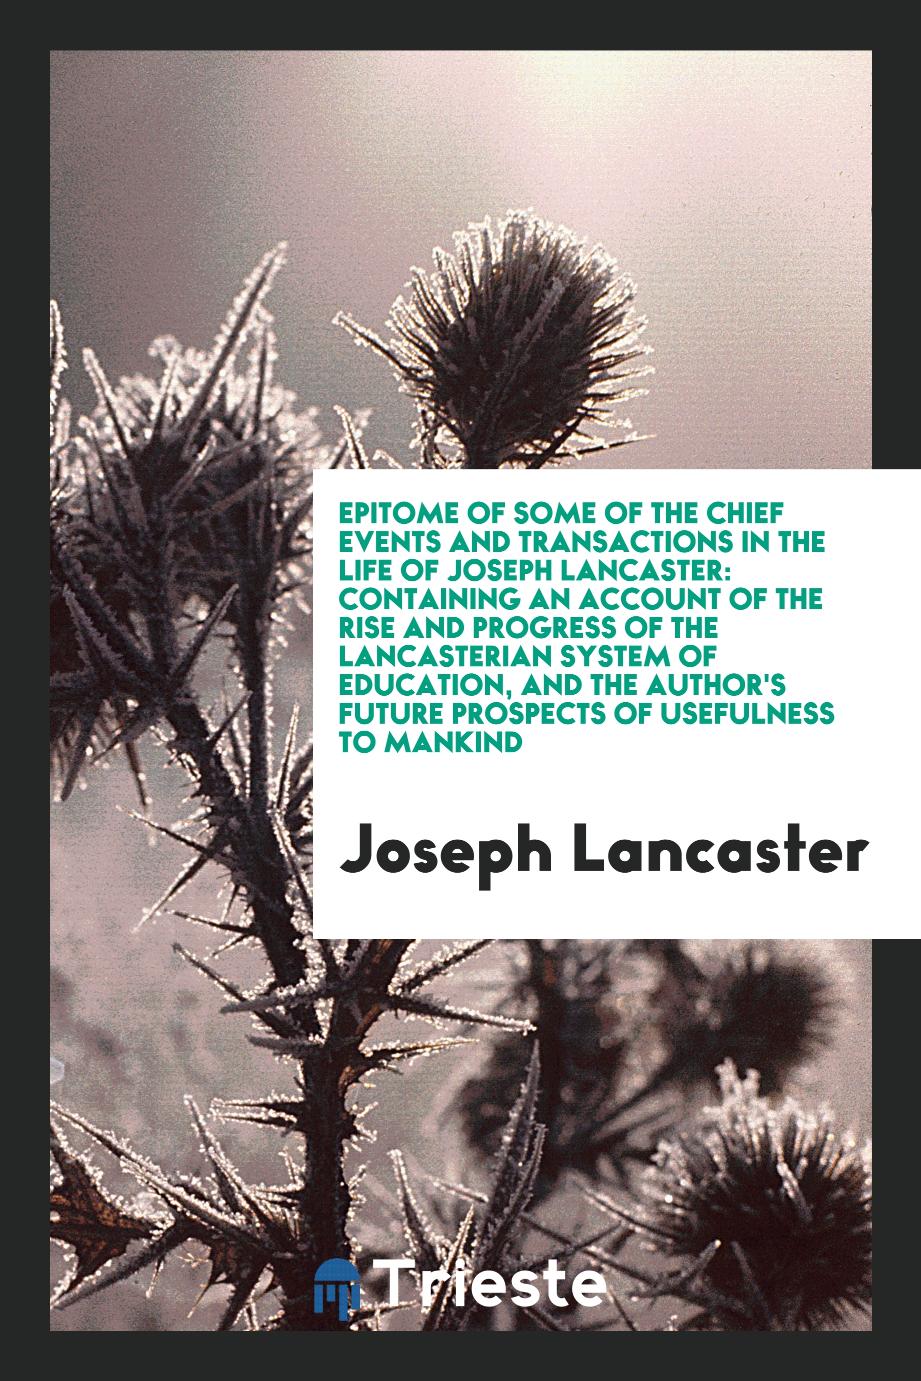 Epitome of some of the chief events and transactions in the life of Joseph Lancaster: containing an account of the rise and progress of the Lancasterian system of education, and the author's future prospects of usefulness to mankind